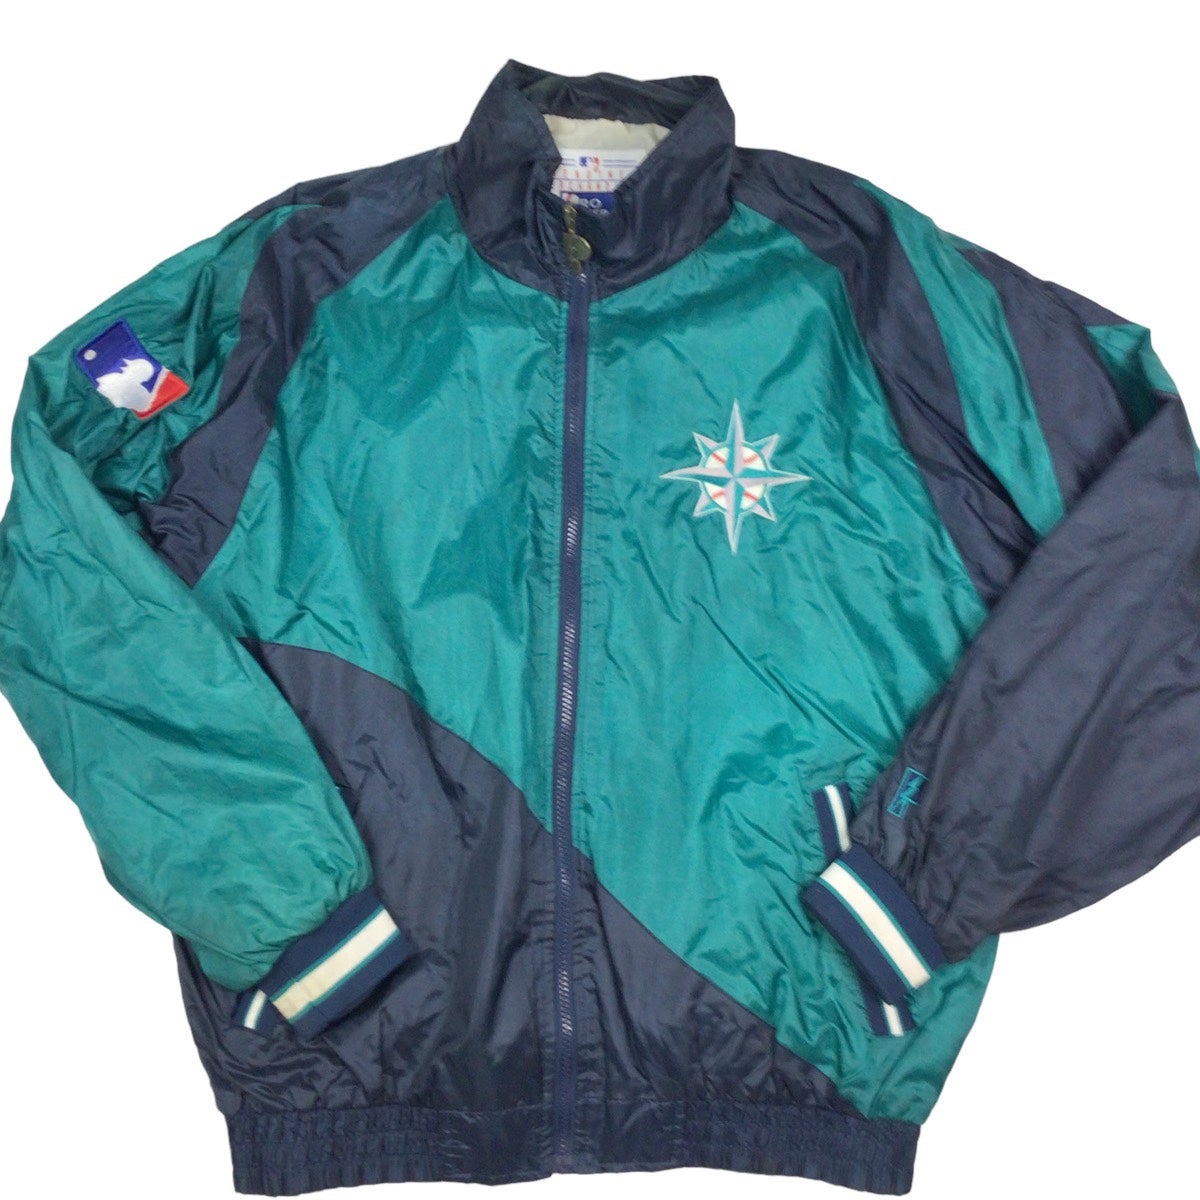 Vintage 90s Seattle Mariners MLB zip up jacket. Made in Korea. Pro player.  Lined.